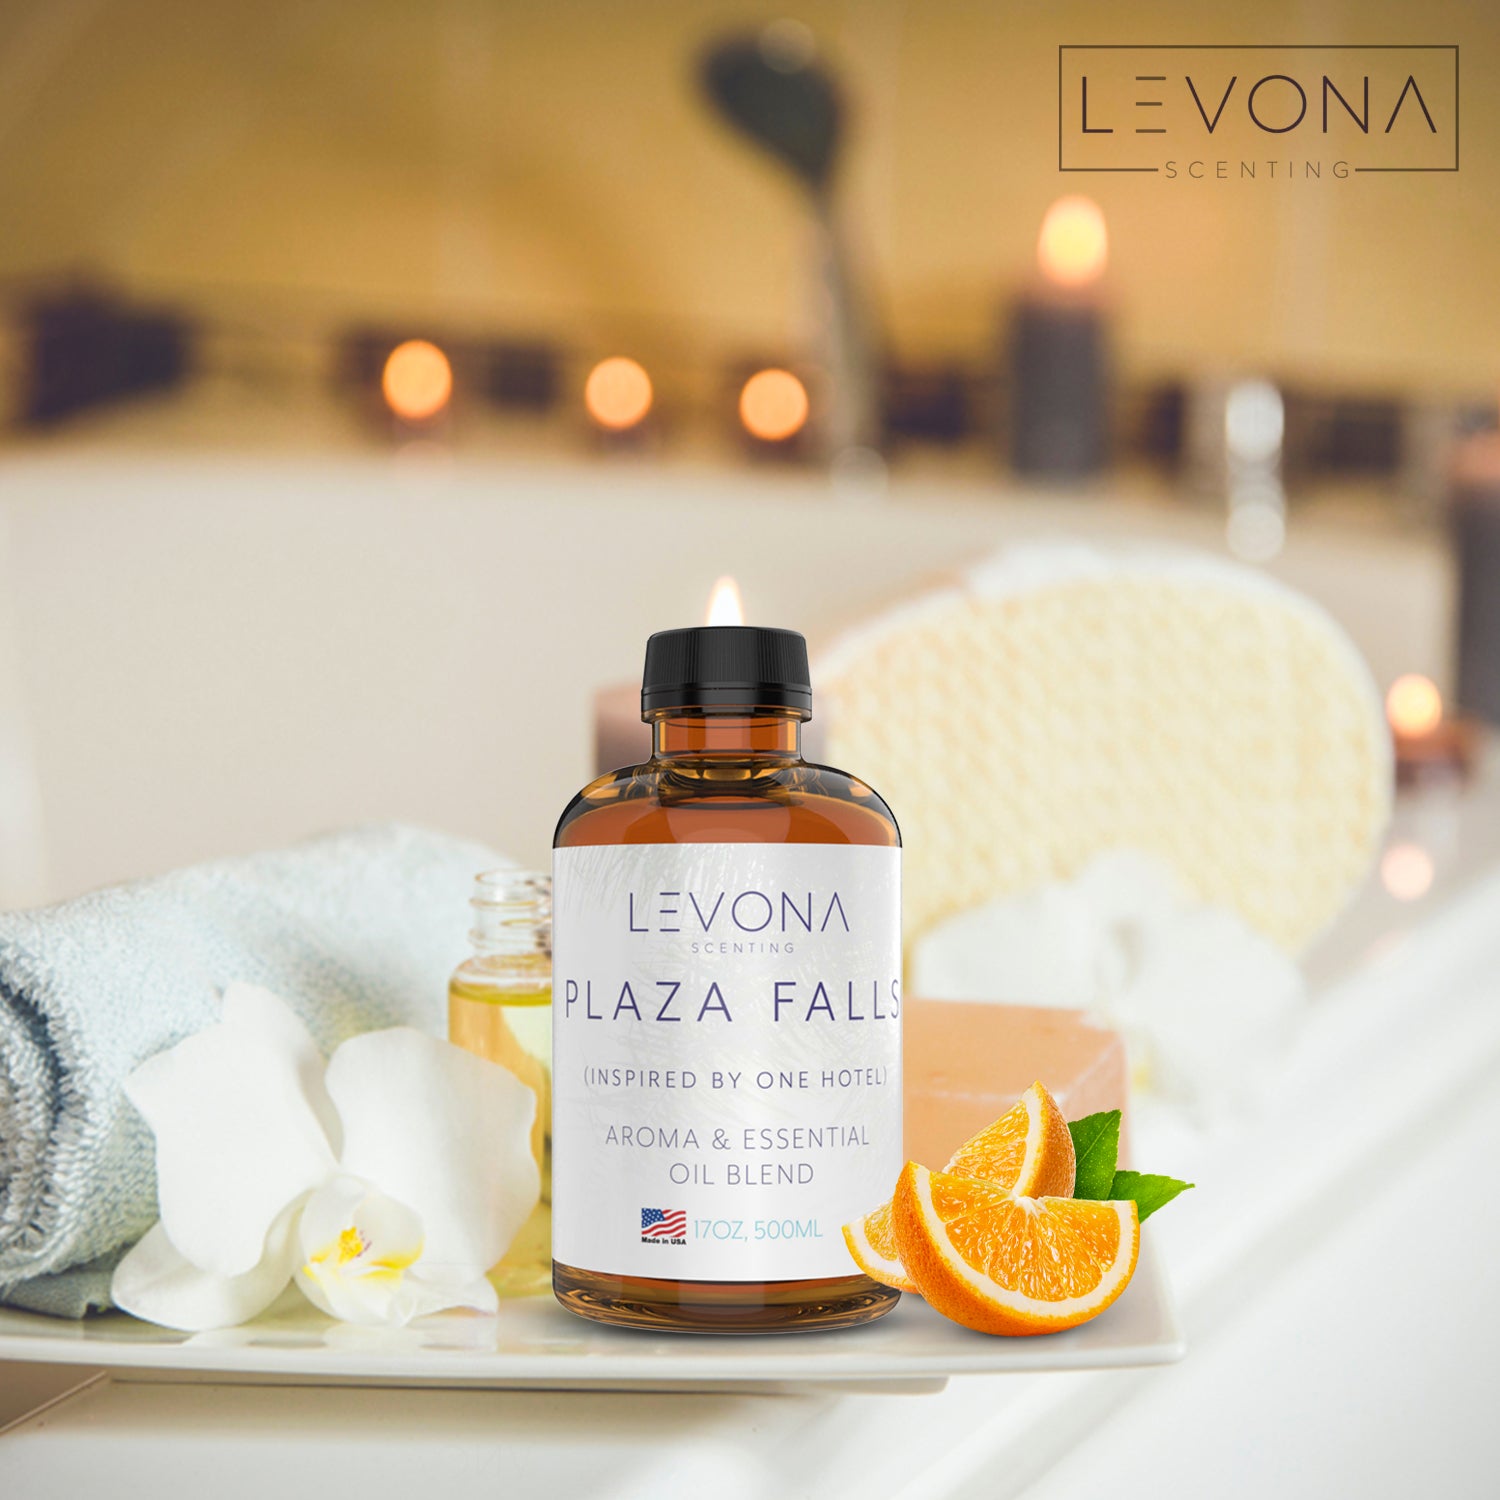 plaza falls essential oils | hotel collection 